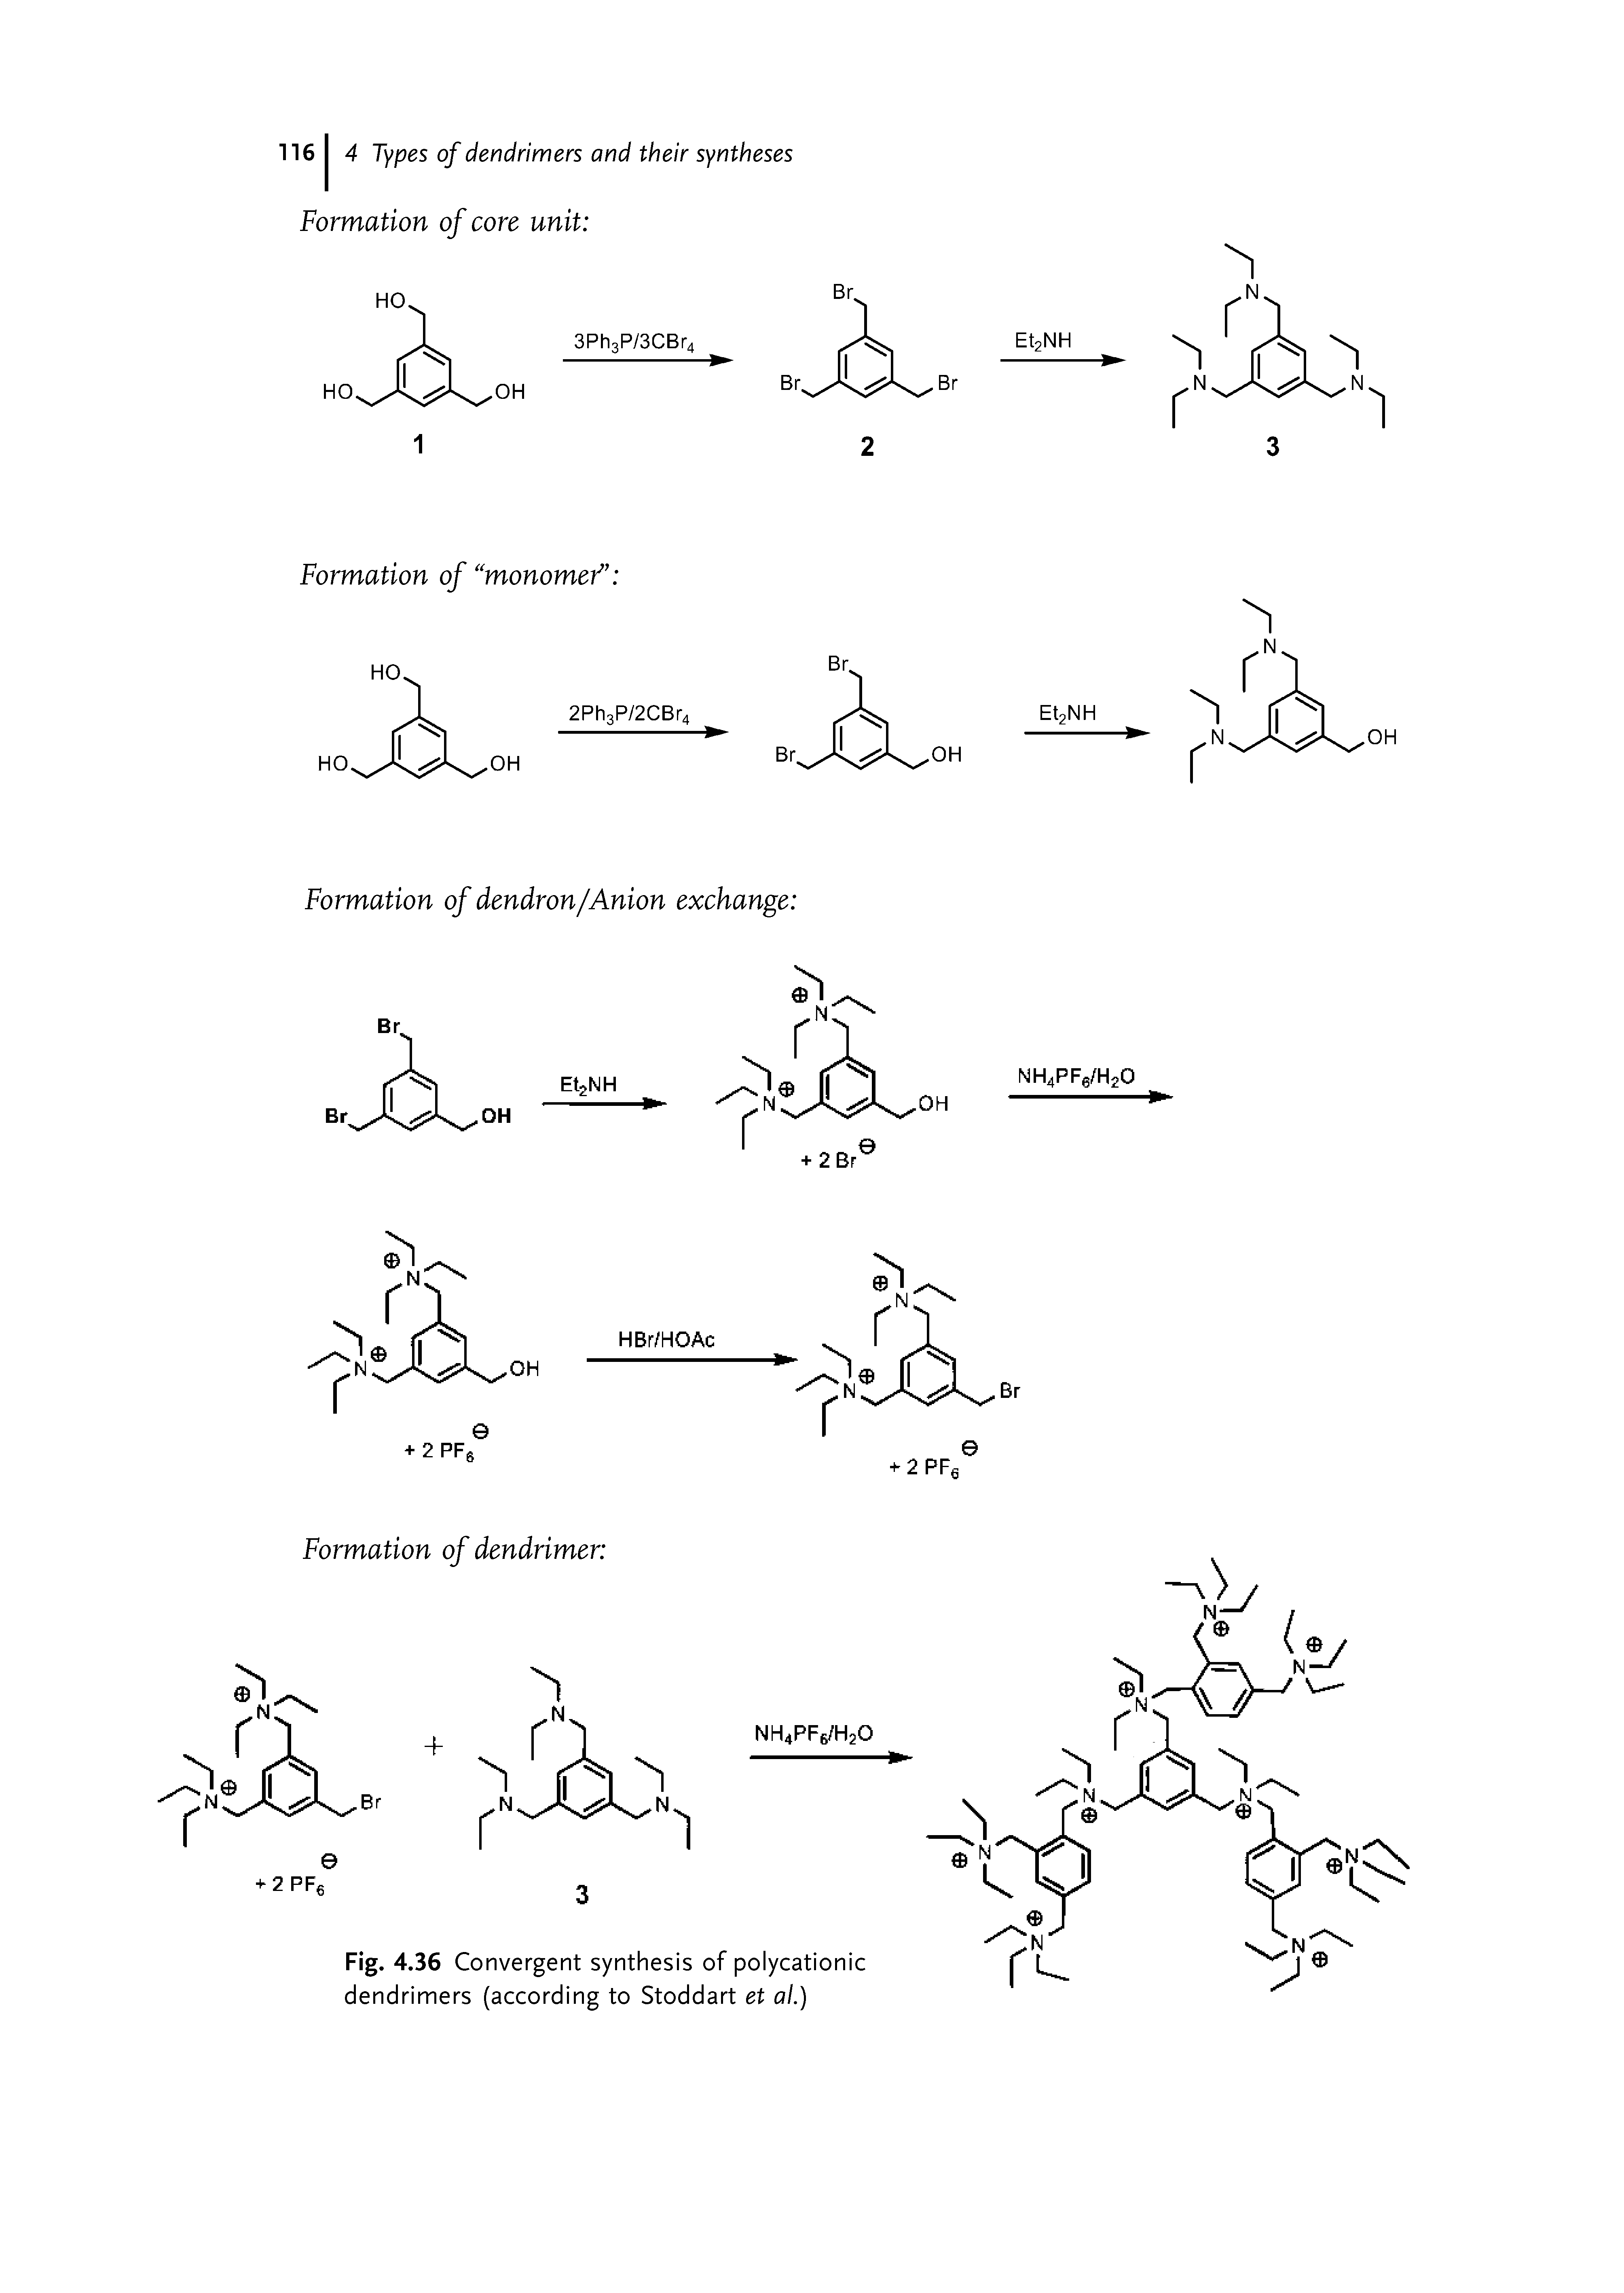 Fig. 4.36 Convergent synthesis of polycationic dendrimers (according to Stoddart et al.)...